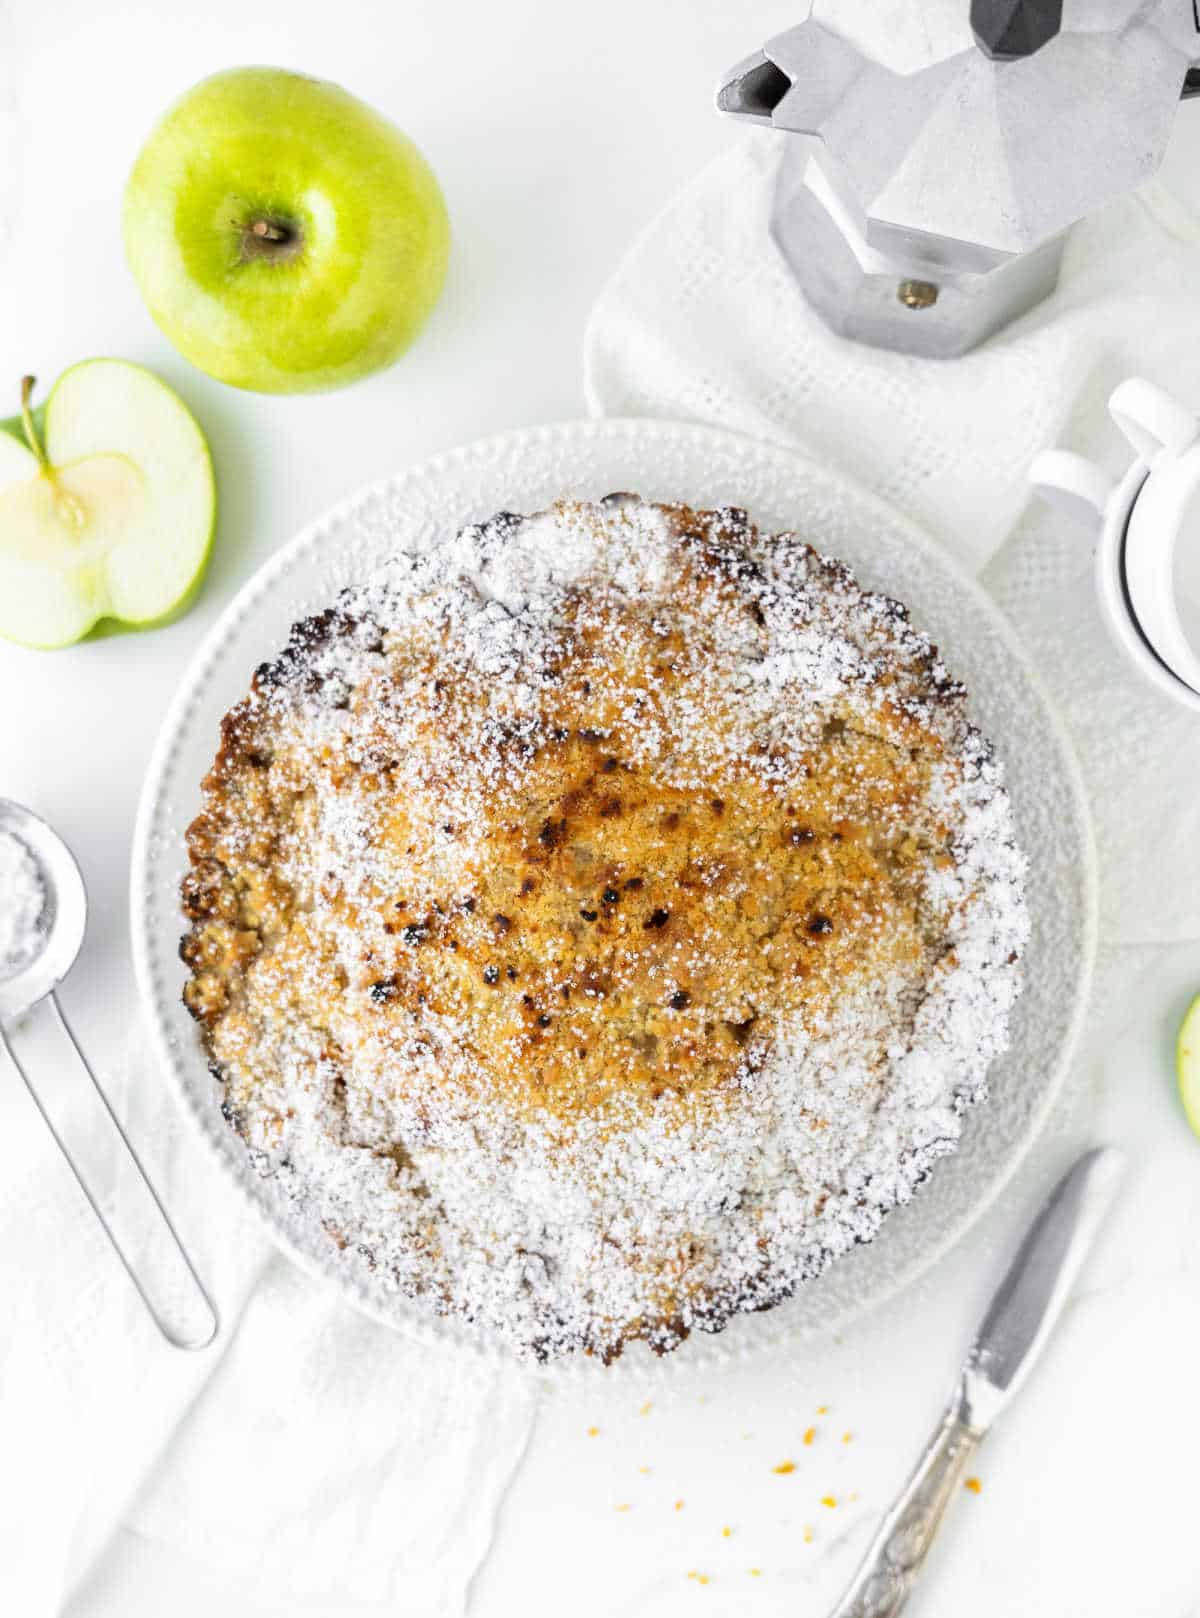 Whole apple crumb pie on a white surface. Green apples, cutlery, a metal coffee pot. Top view.